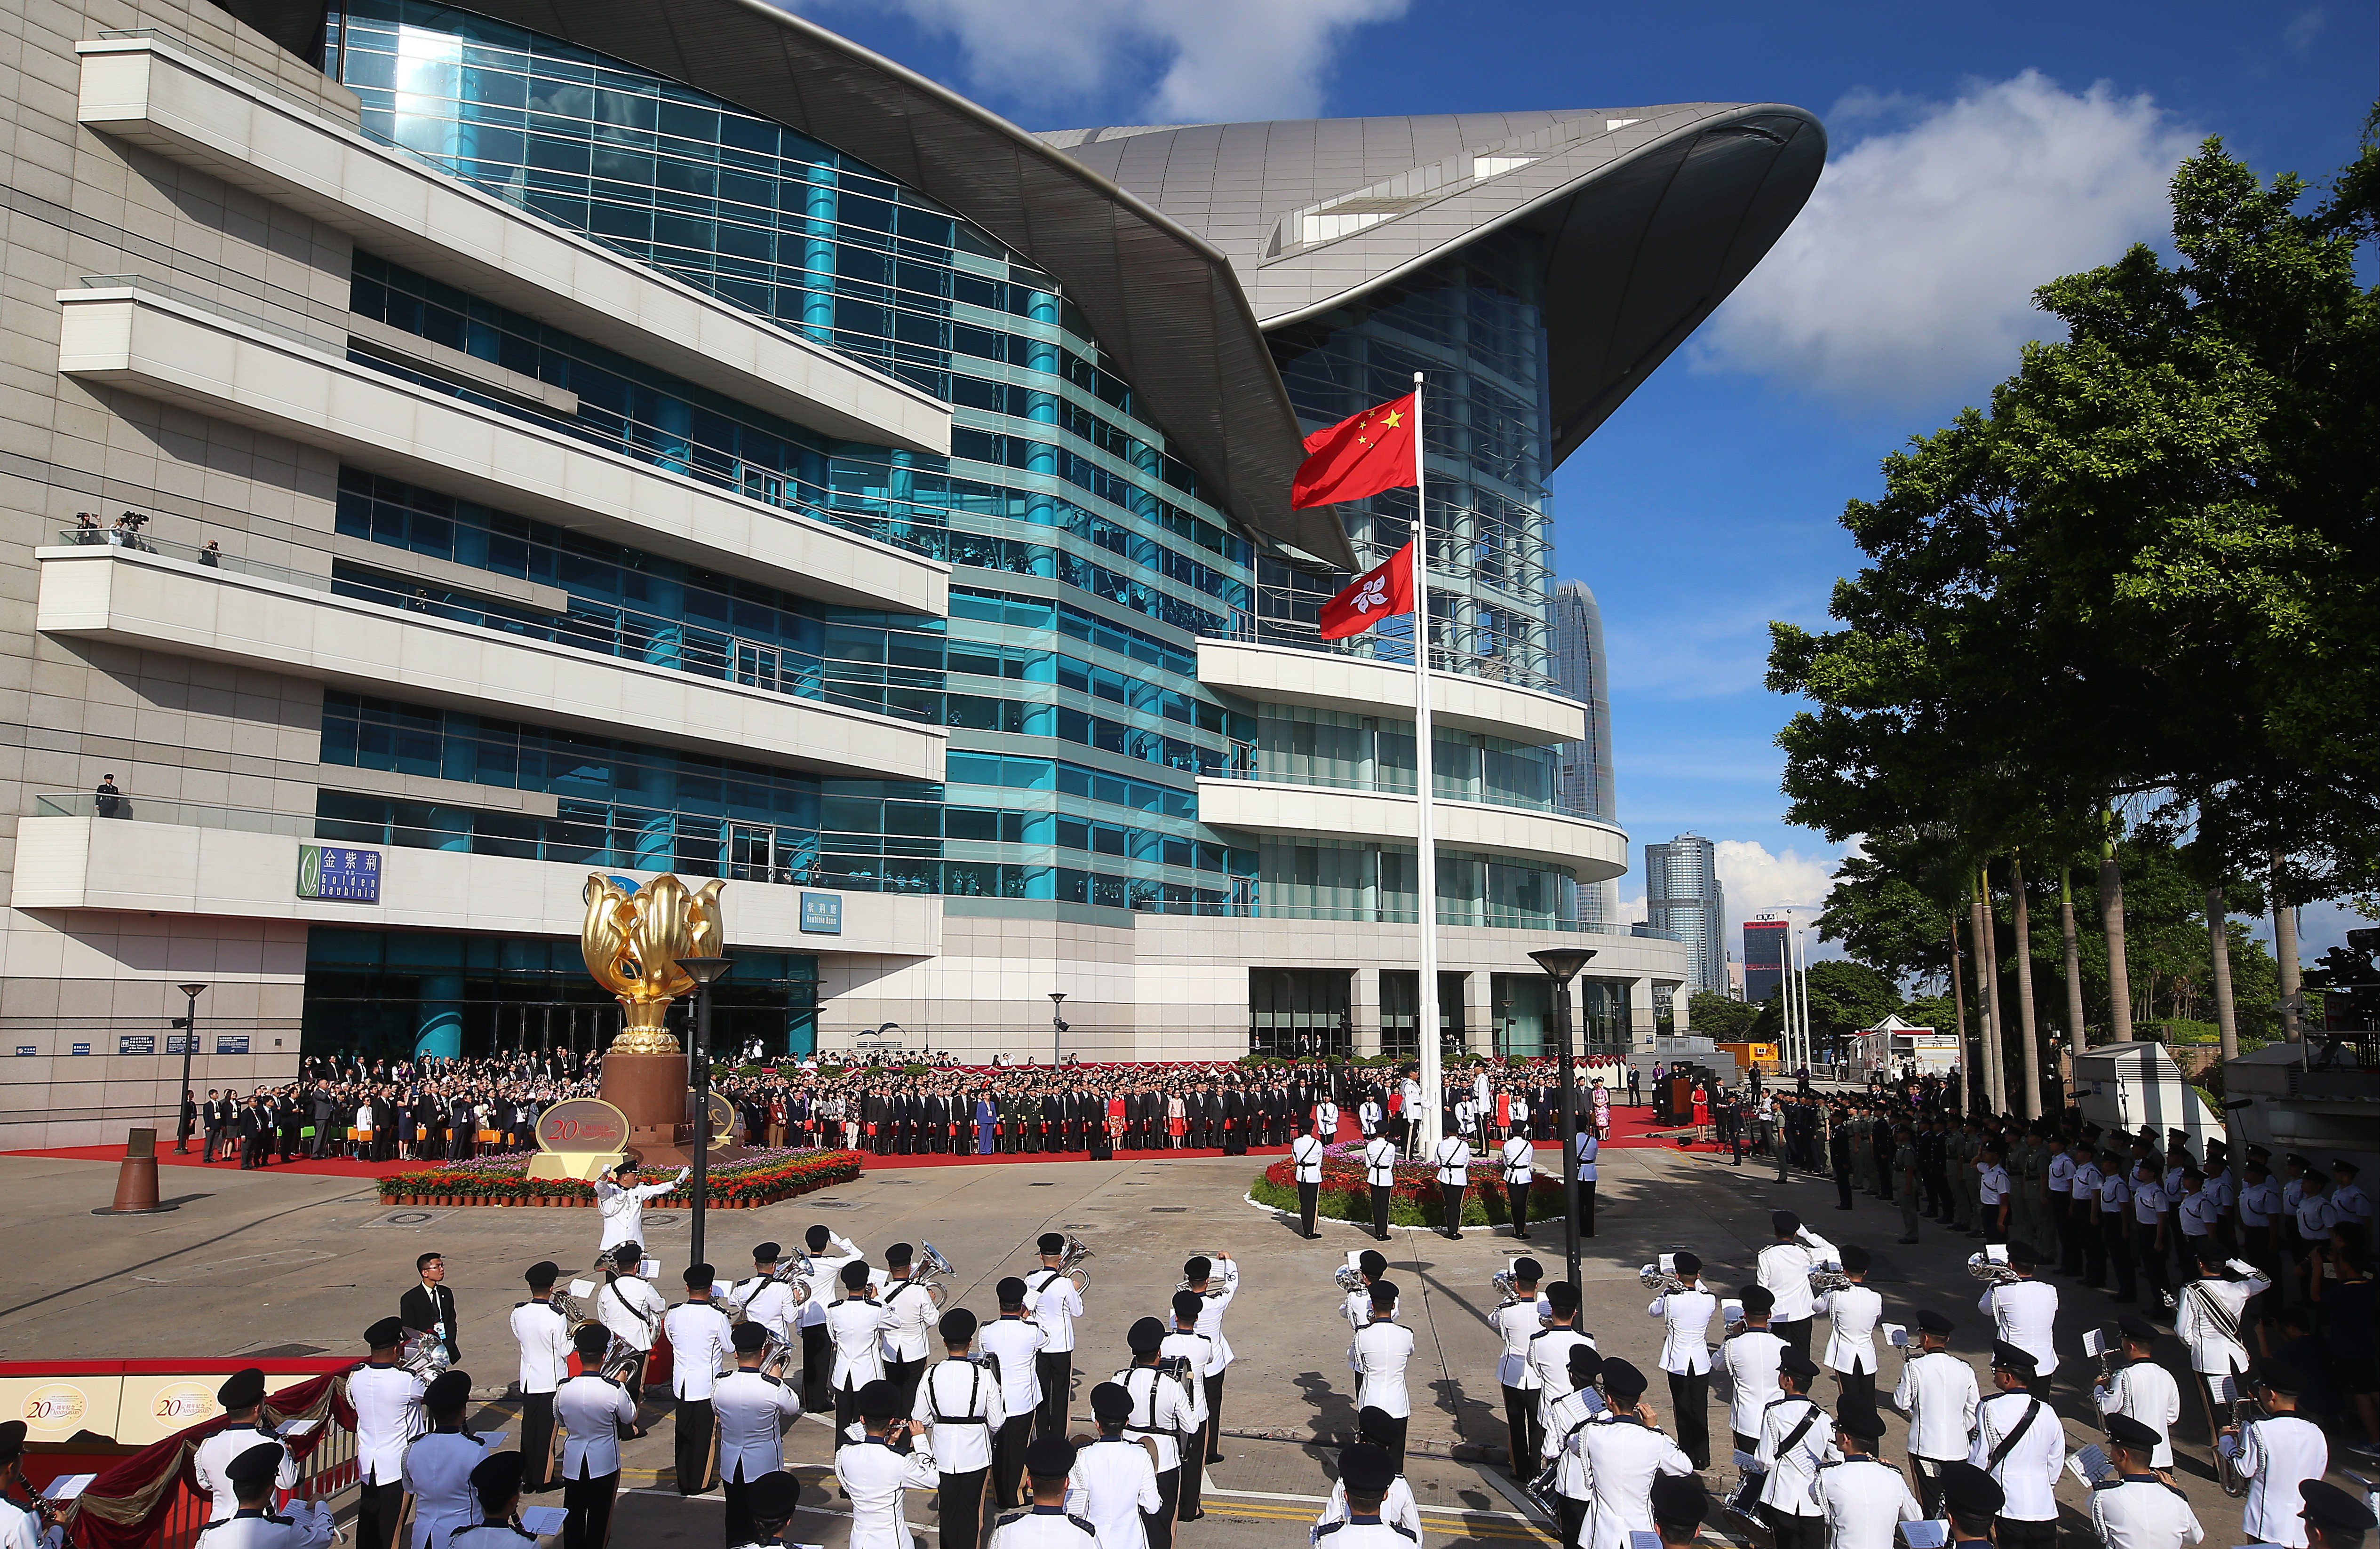 The search team had very little time to prepare for the flag-raising ceremony at the Golden Bauhinia Square in Wan Chai. Photo: K.Y. Cheng